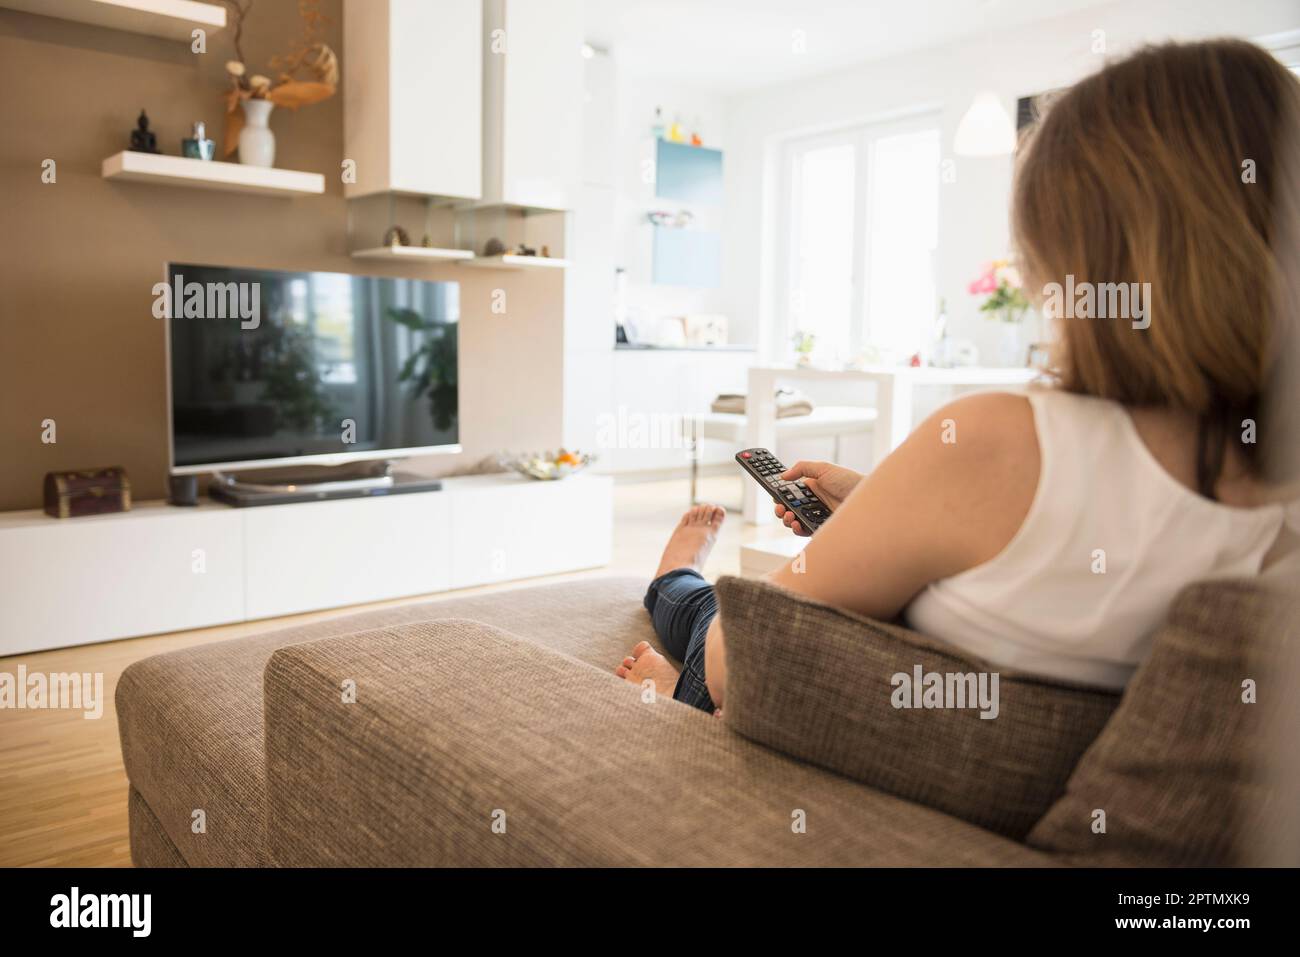 Pregnant woman sitting on sofa and watching TV with remote control, Munich, Bavaria, Germany Stock Photo